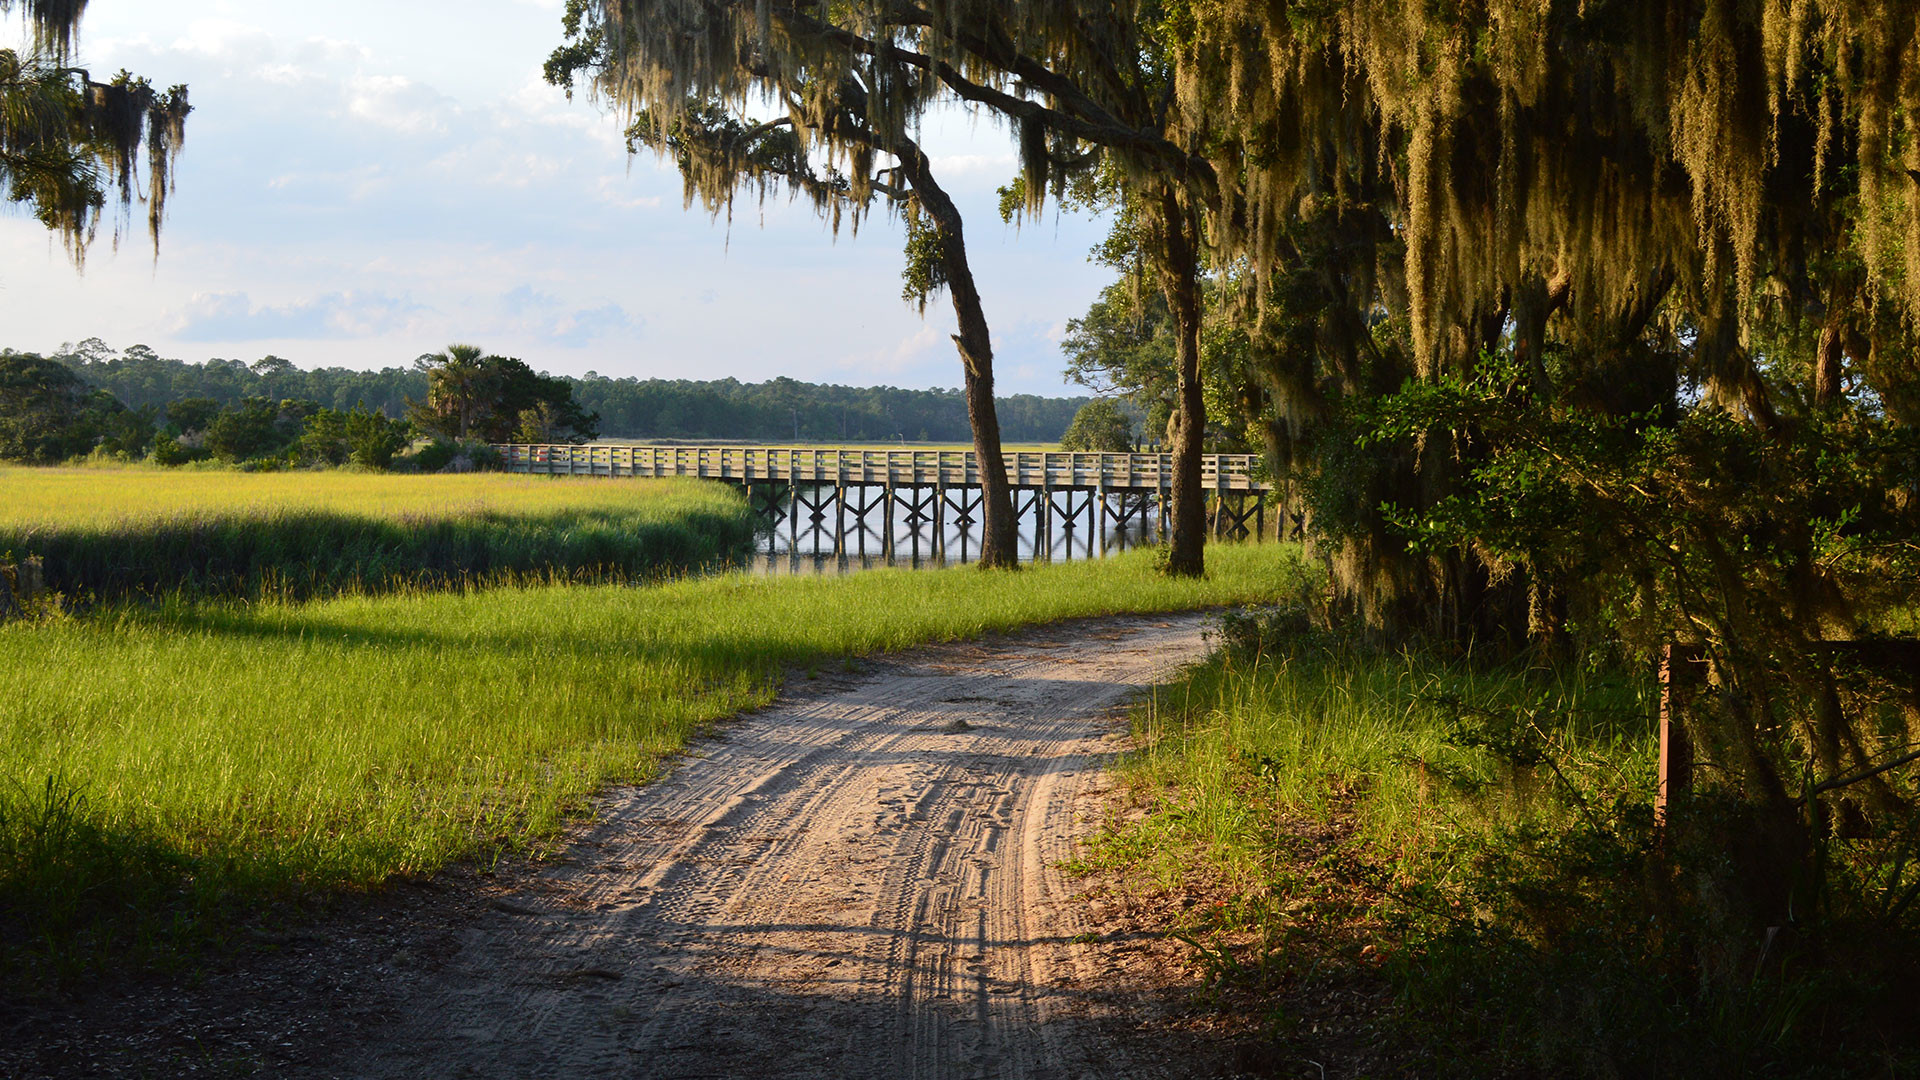 In the summer of 2014, Georgia Tech scientists traveled to Sapelo Island, a barrier island along the Georgia coast. Sapelo, famous for its swampy beauty,